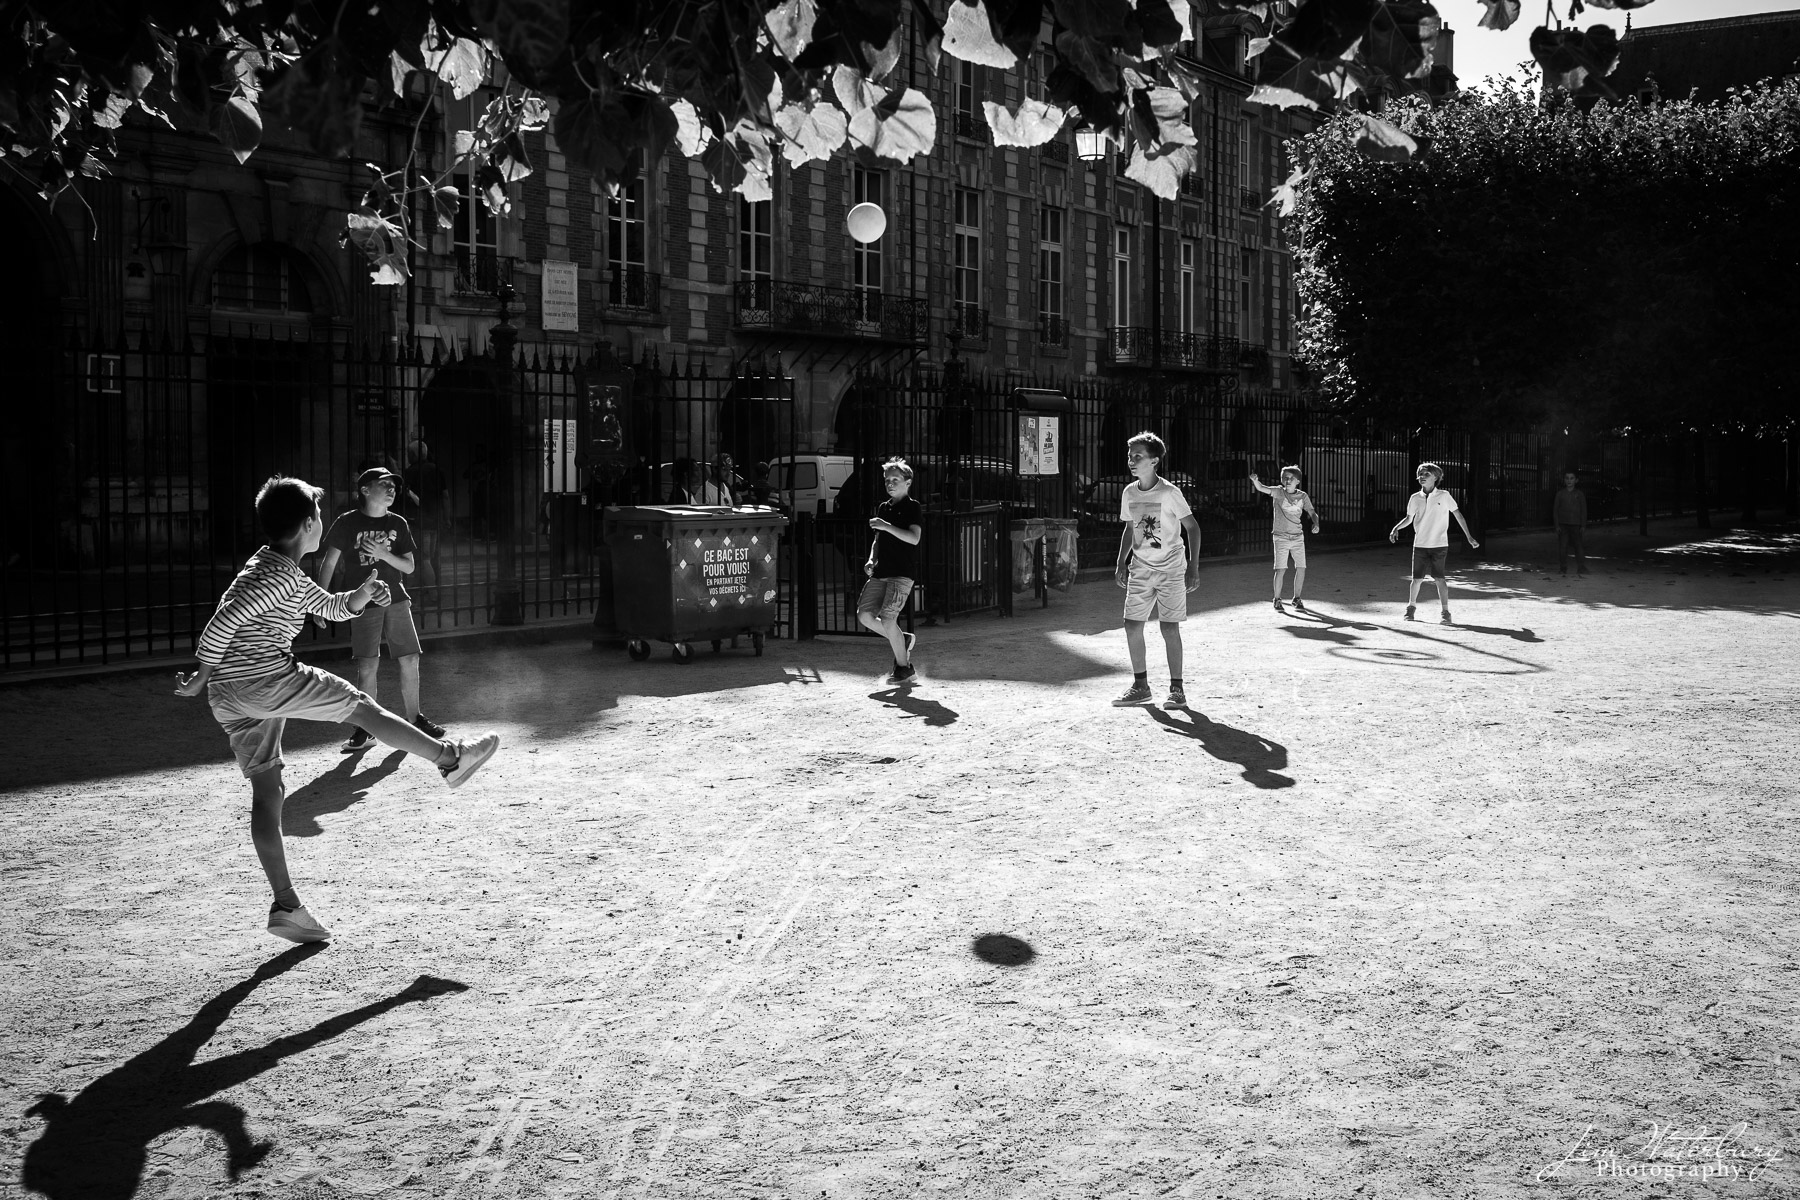 Boys play soccer (football) at the Place des Vosges, Paris, after school. Black & white.